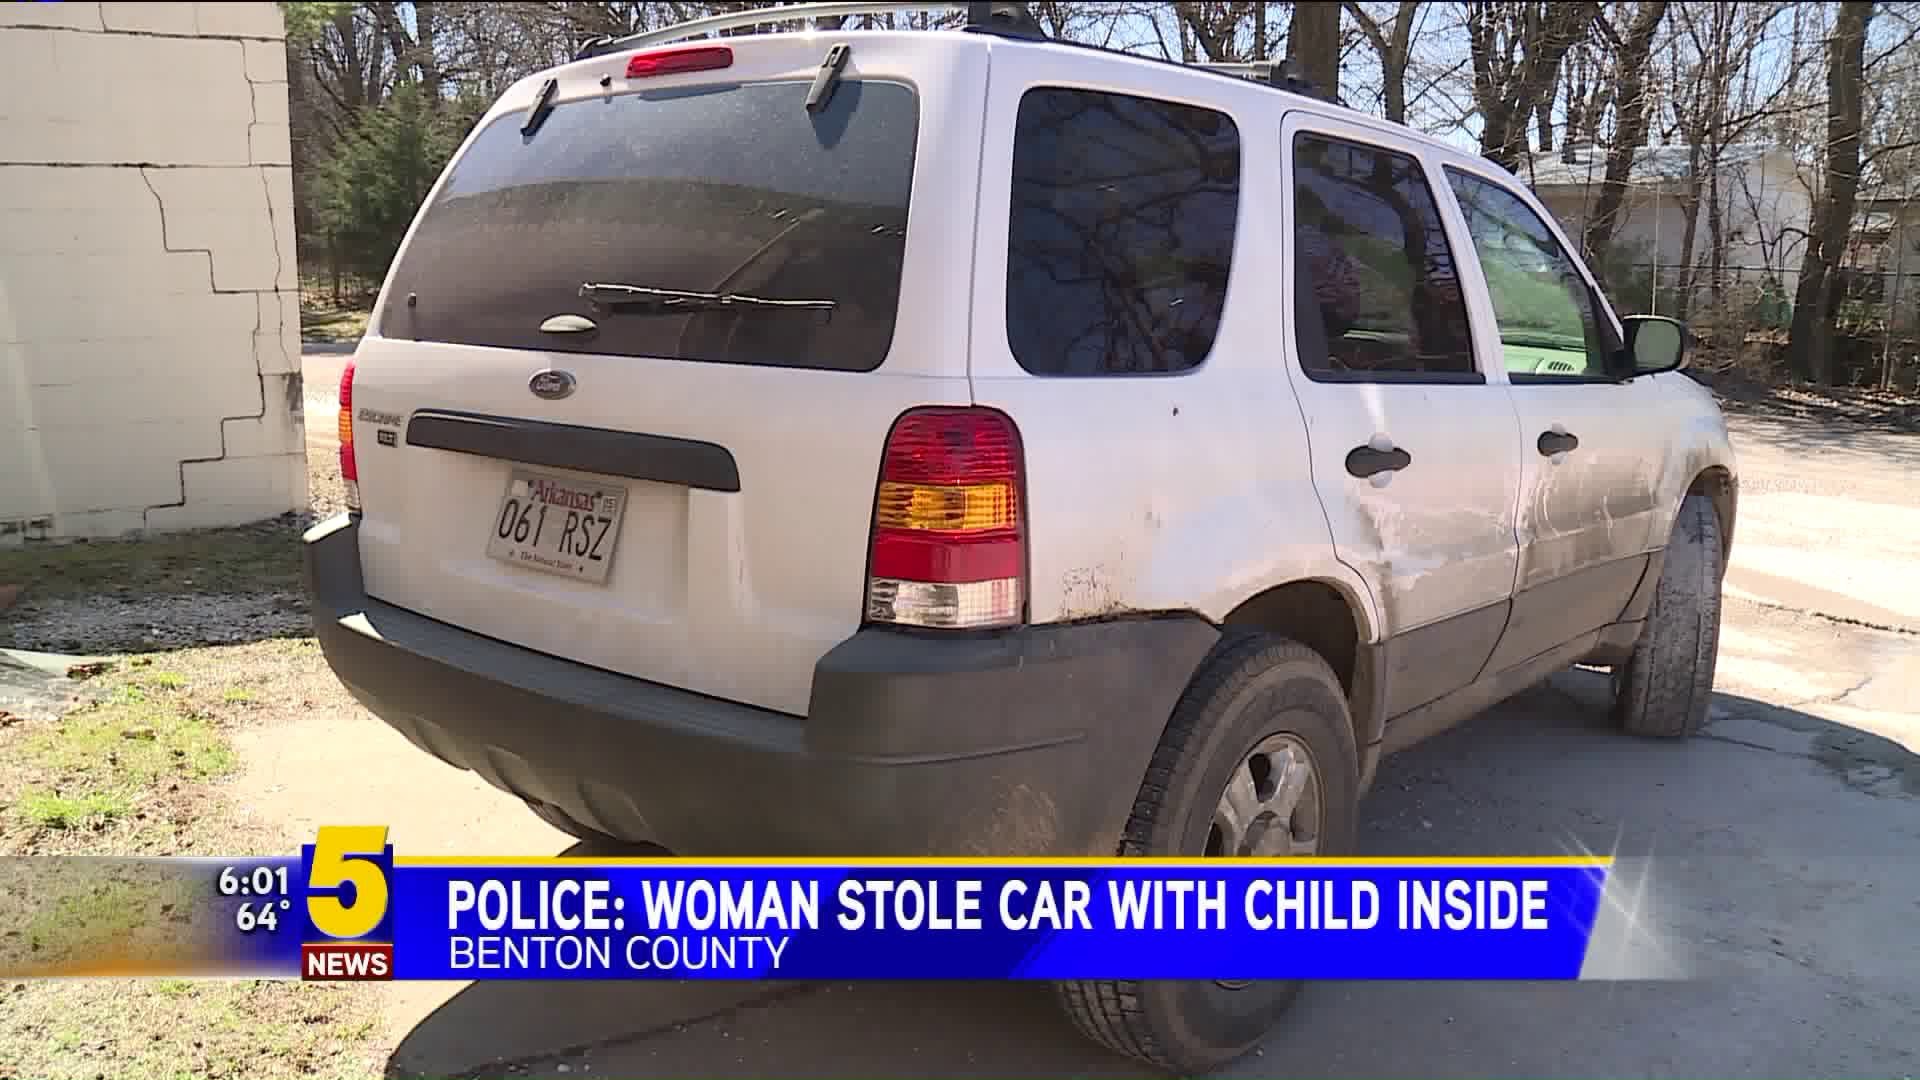 Police: Woman Stole Car With Child Inside